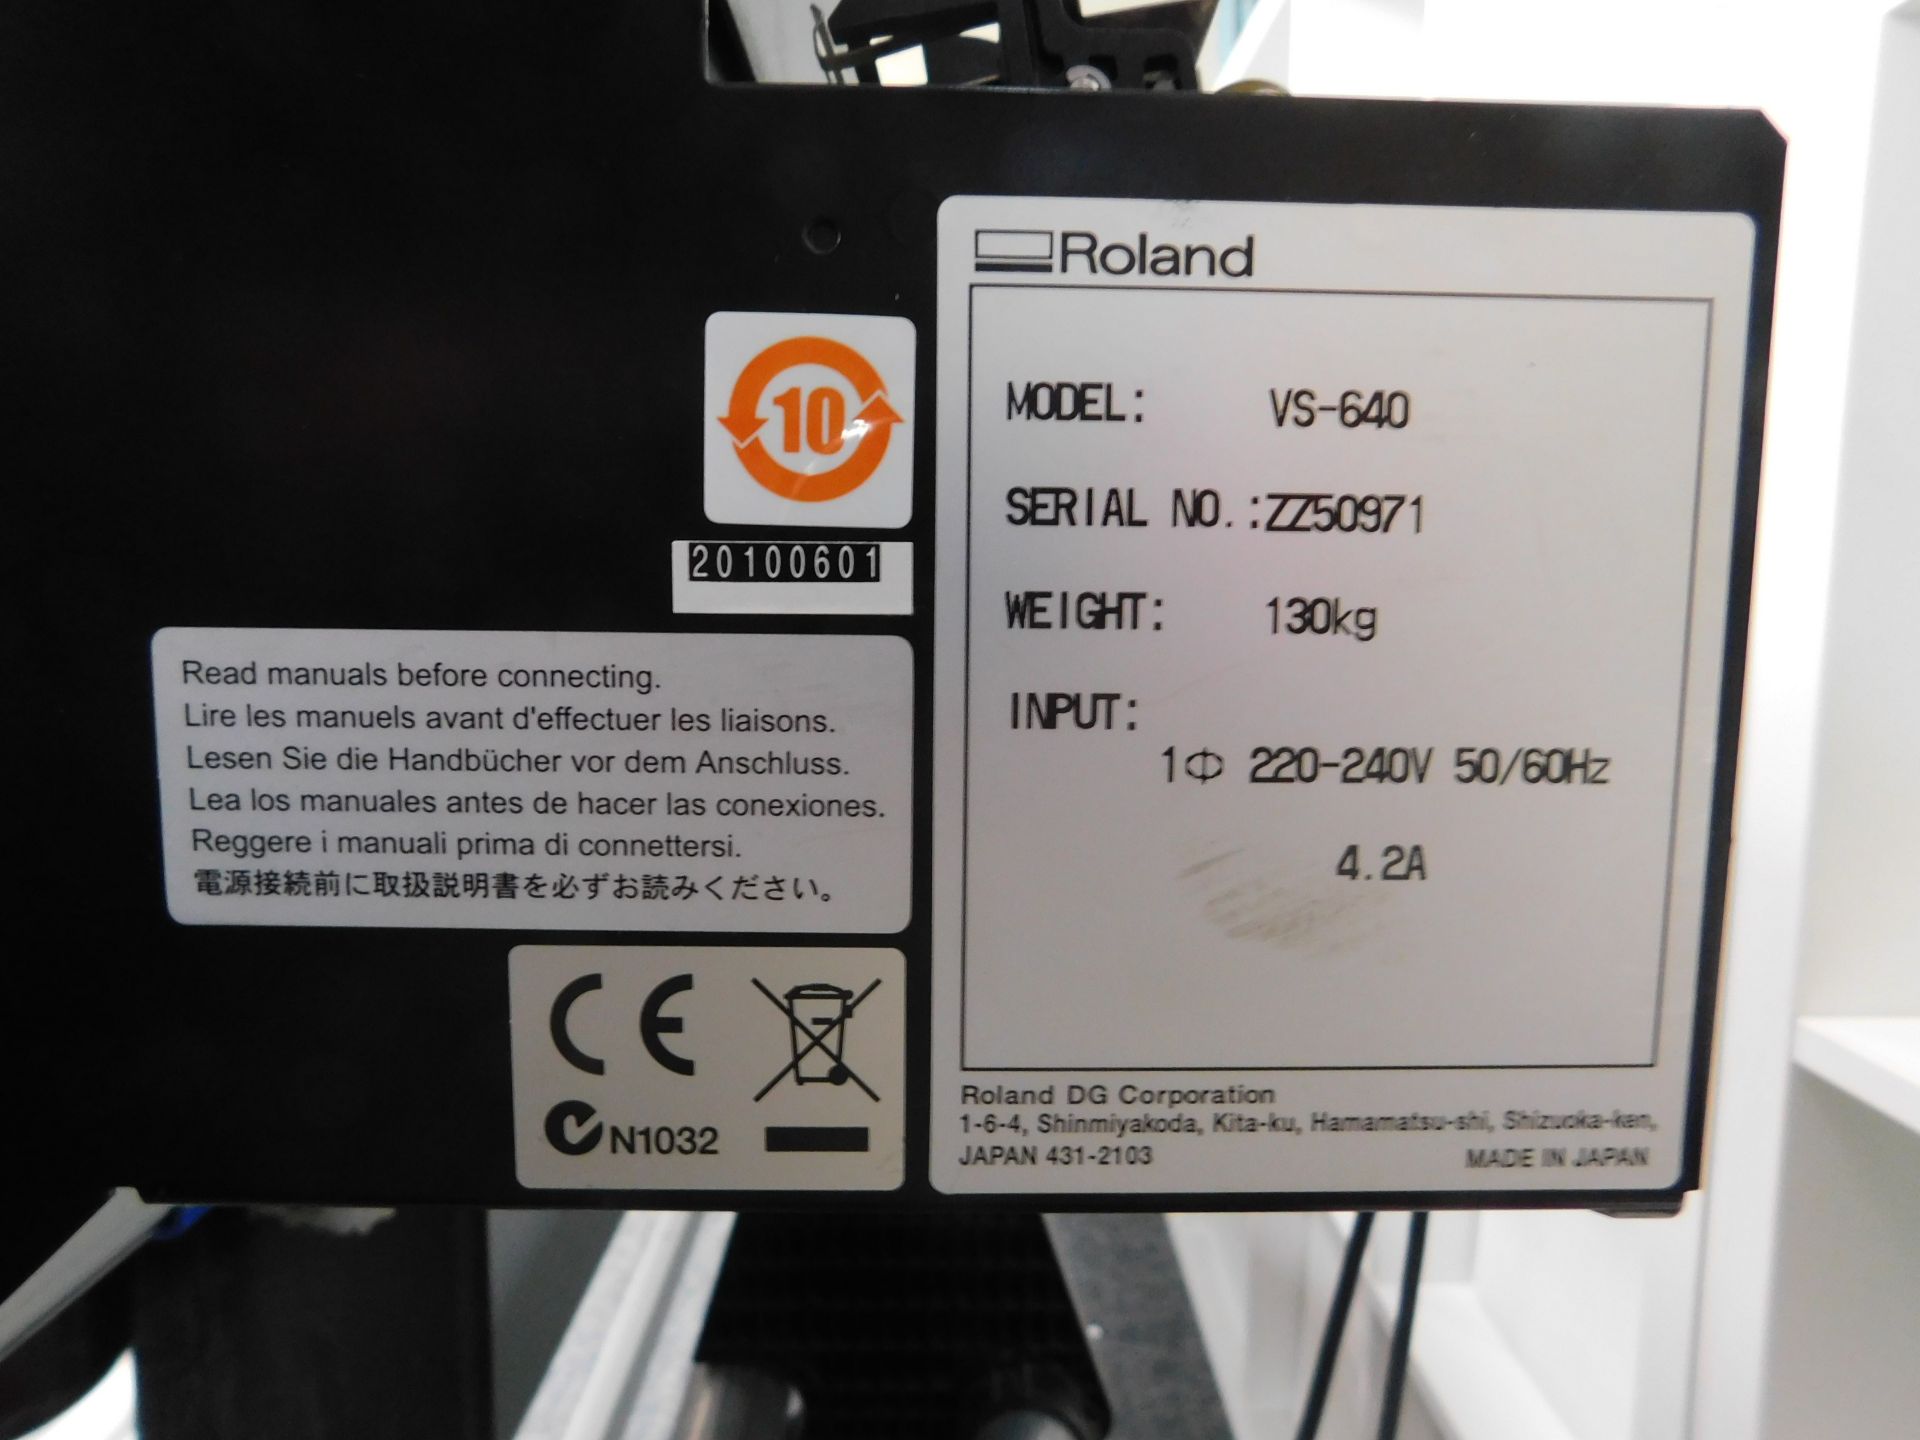 Roland VersaCamm VS640 Wide Format Printer/Cutter Serial Number ZZ50971 (Location: Hatfield - See - Image 3 of 3